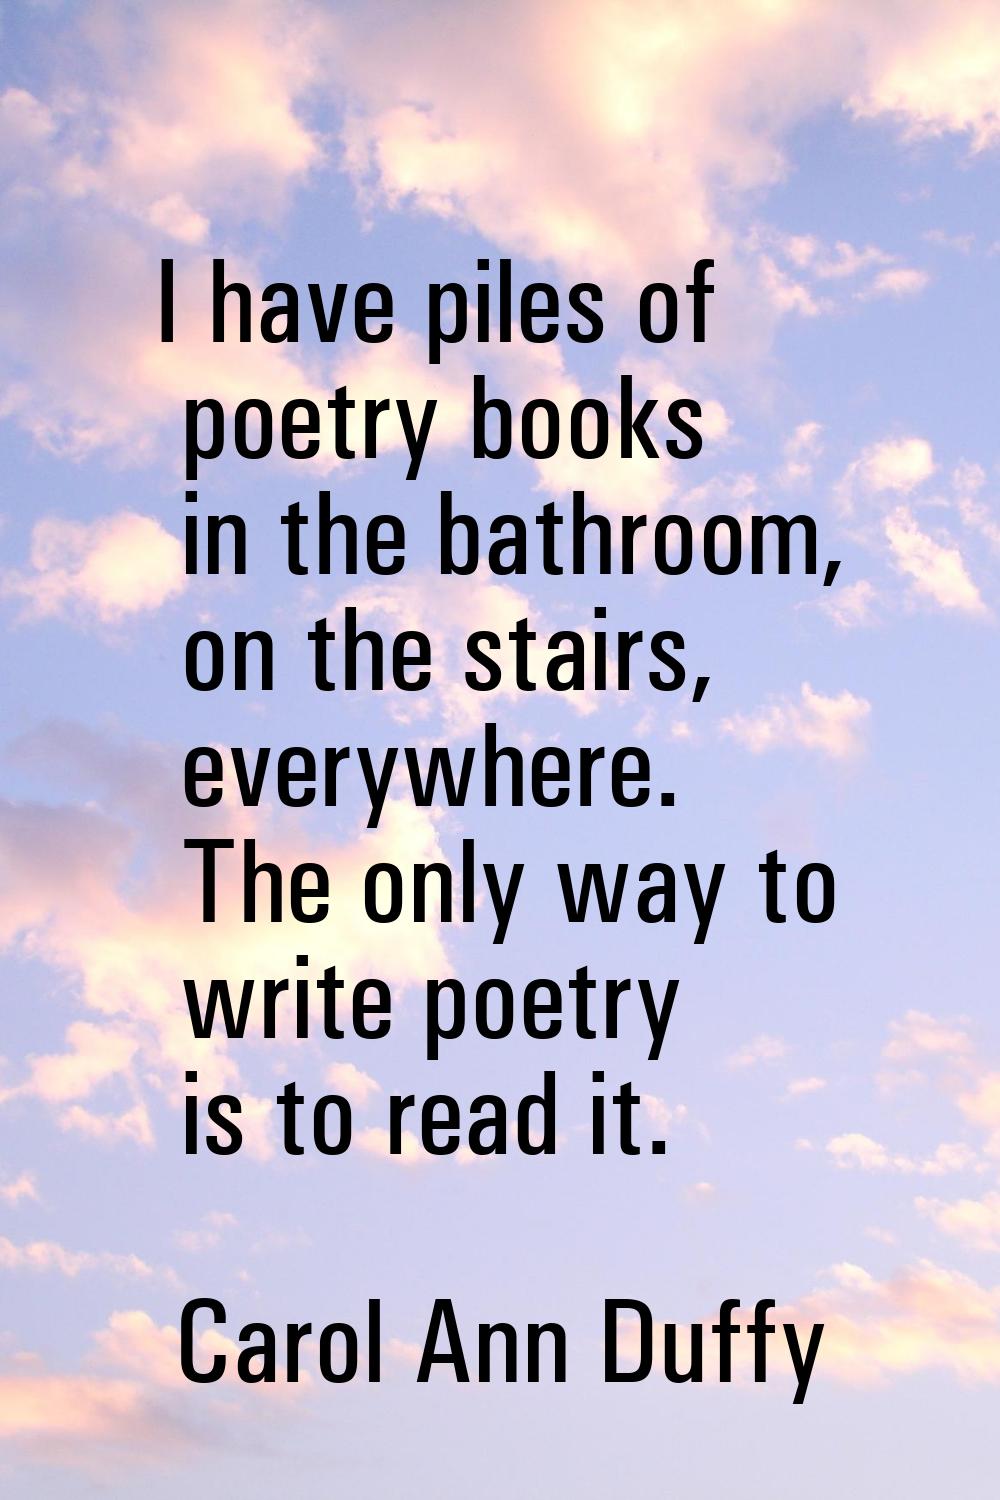 I have piles of poetry books in the bathroom, on the stairs, everywhere. The only way to write poet